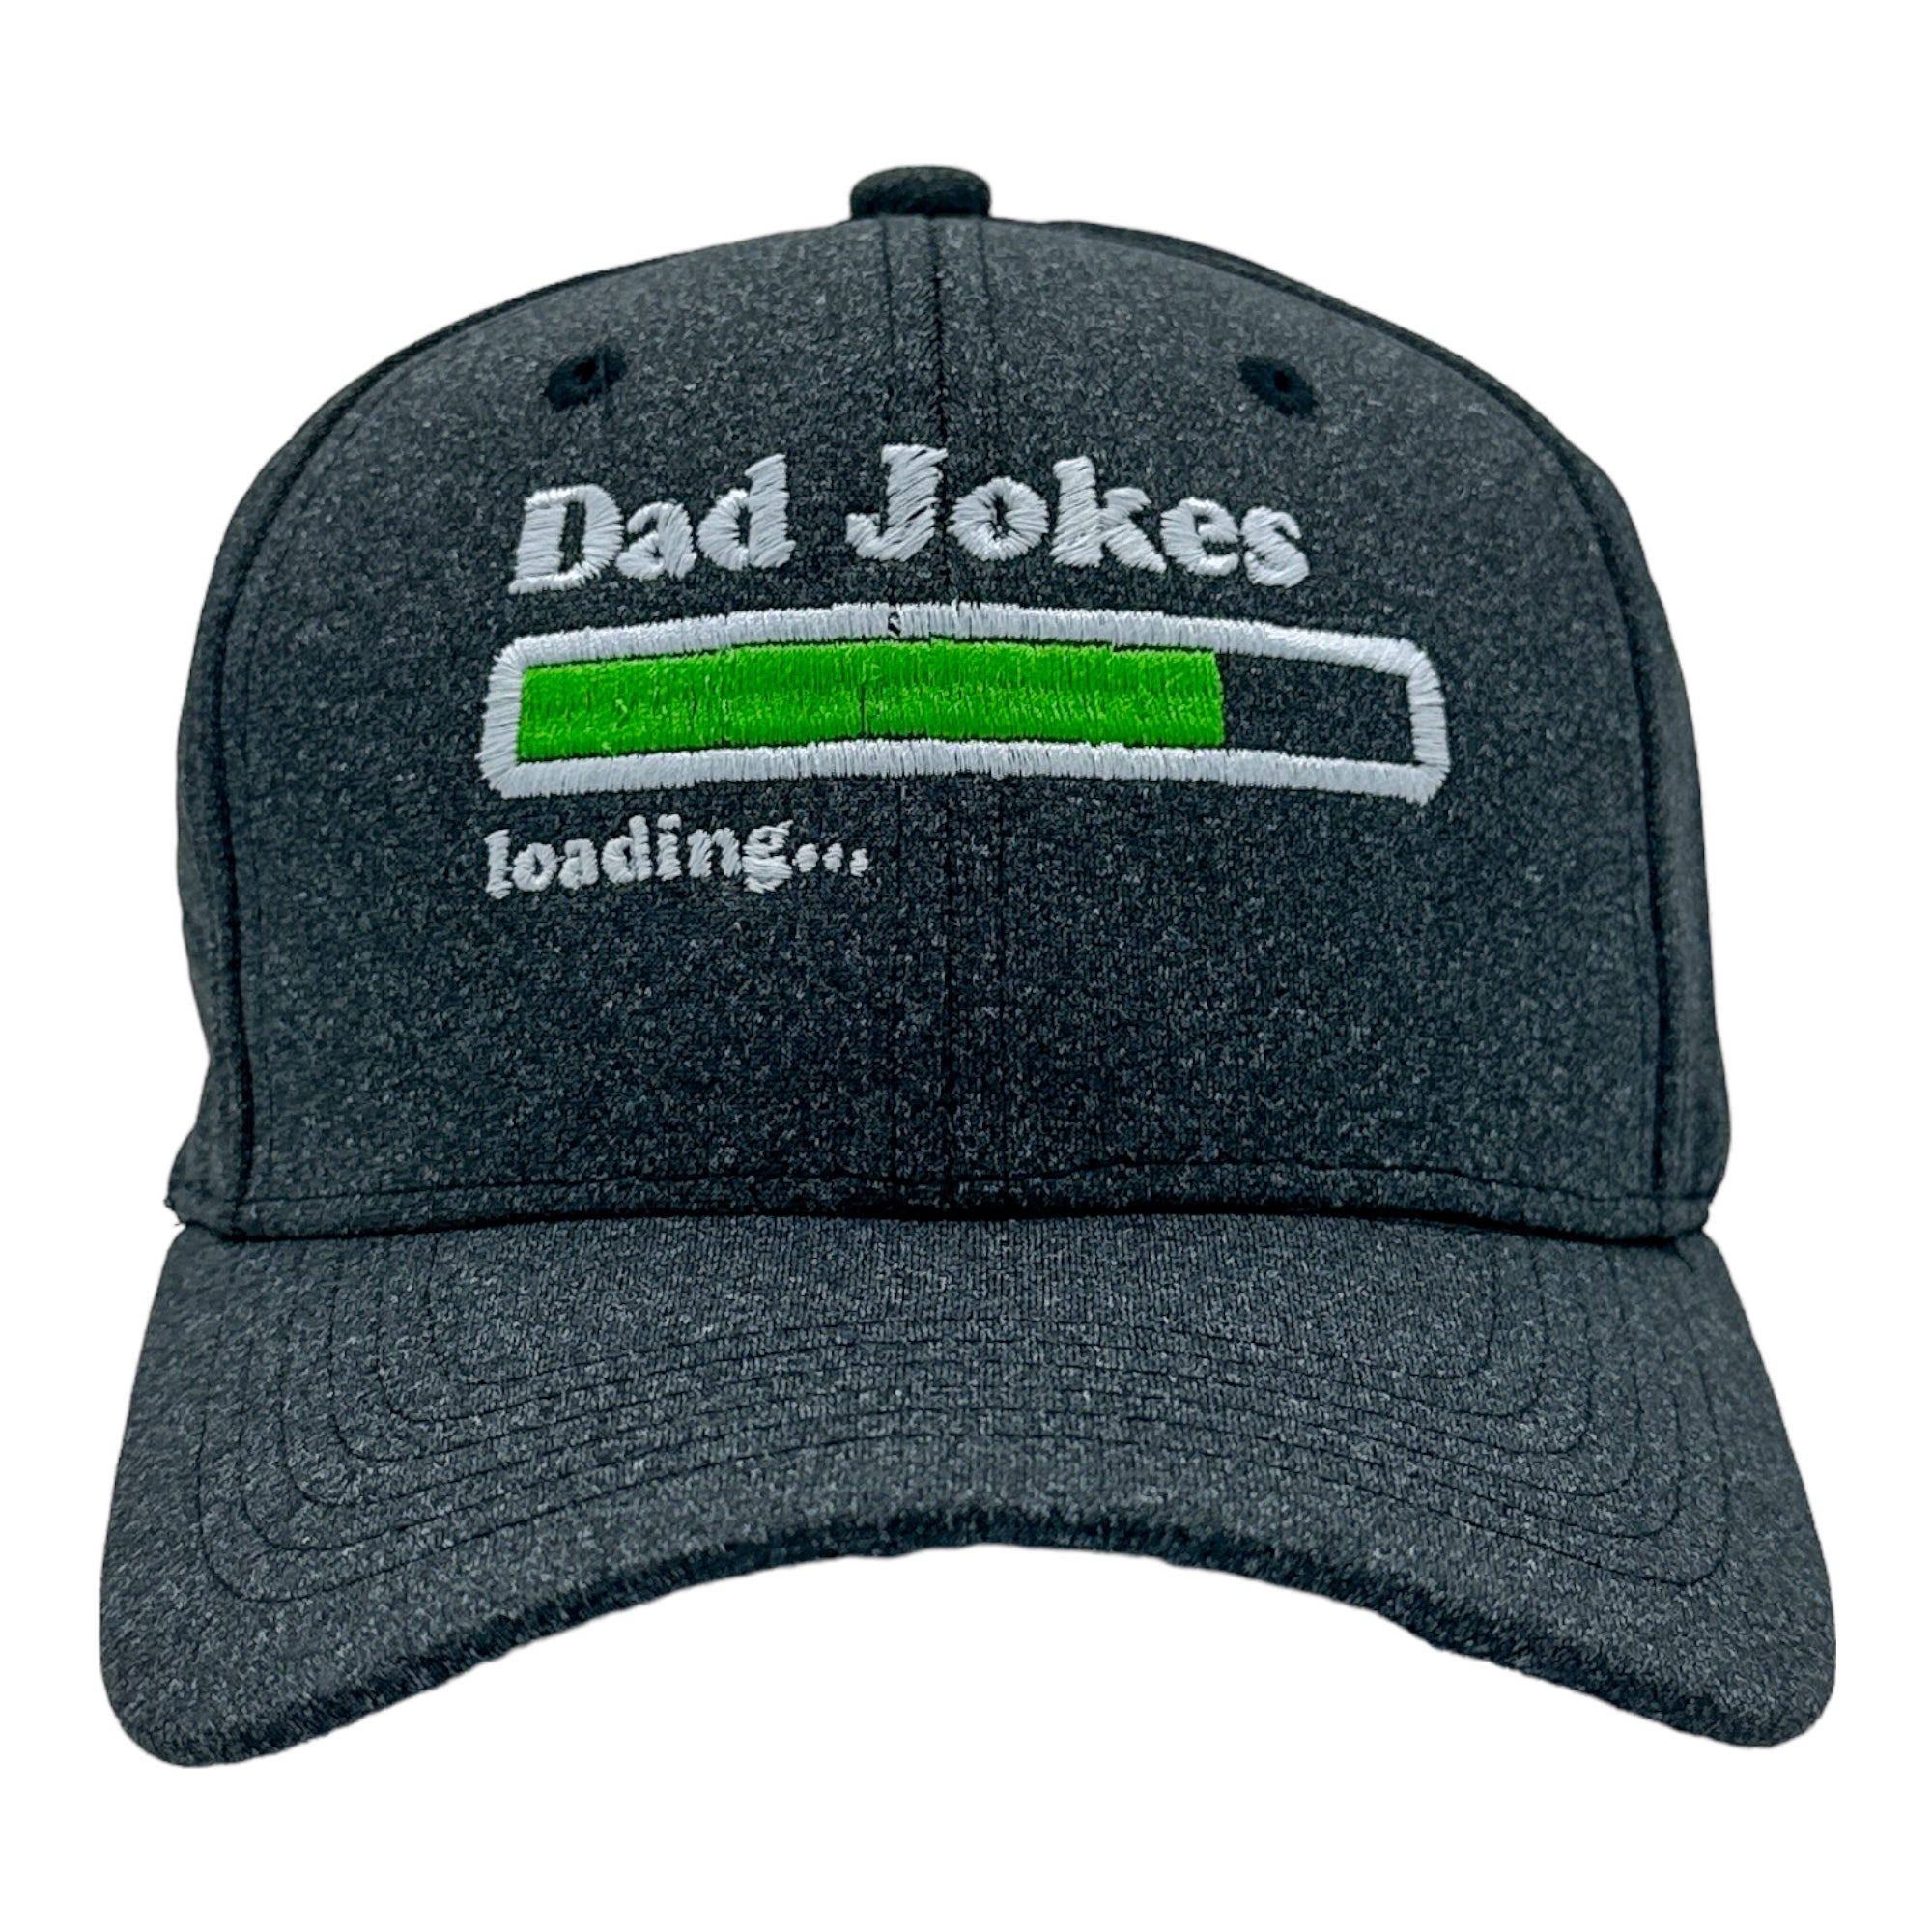 Funny Black - Dad Jokes Loading Dad Jokes Loading Nerdy Father's Day Sarcastic Tee